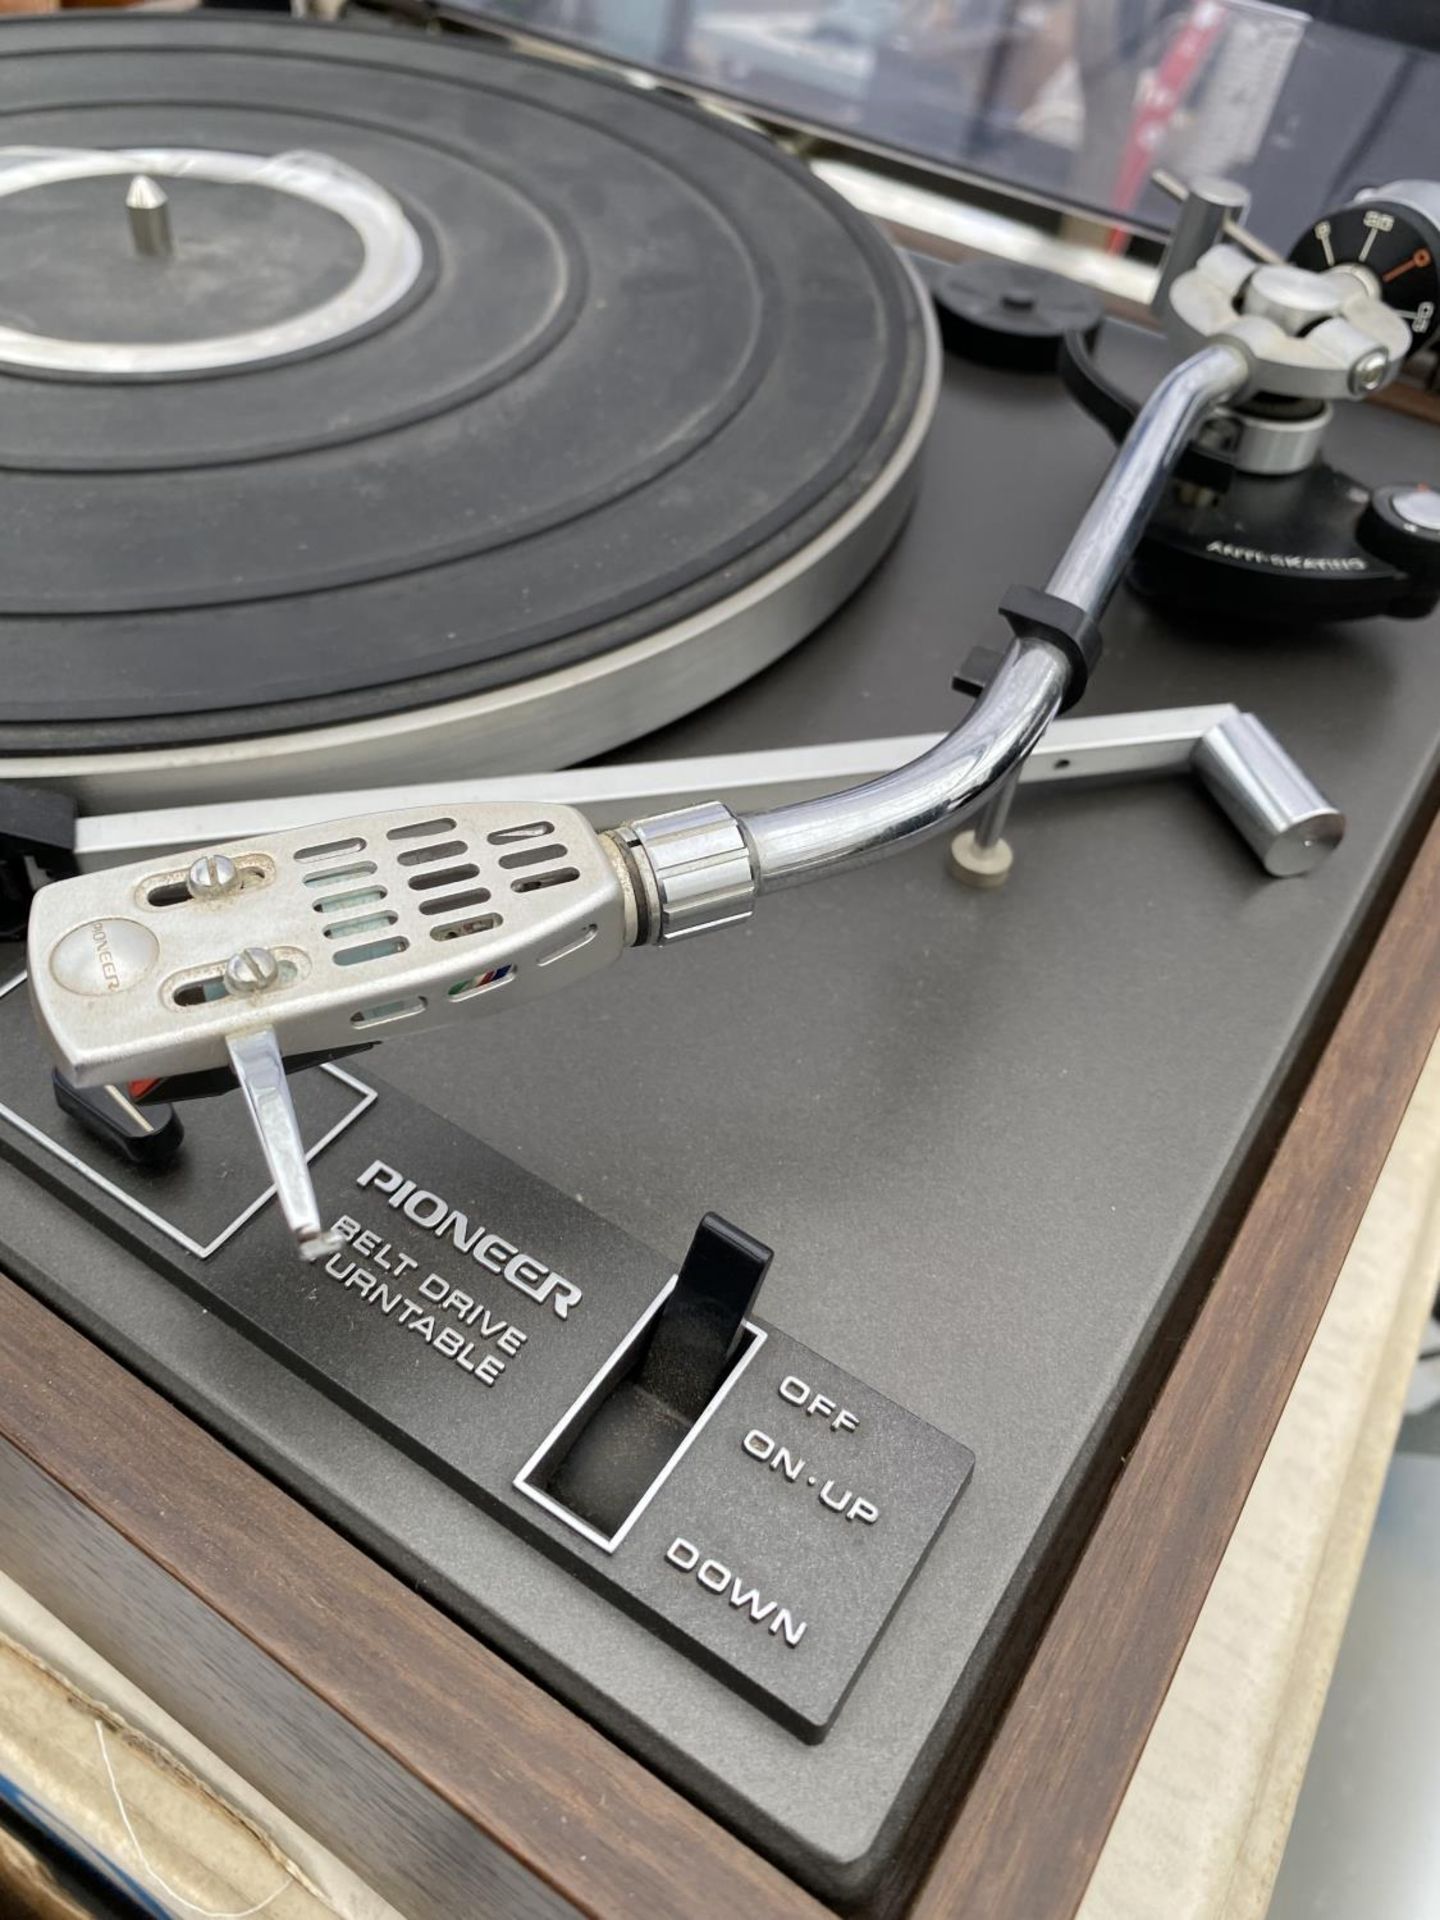 A PIONEER BELT DRIVEN TURNTABLE - Image 3 of 3